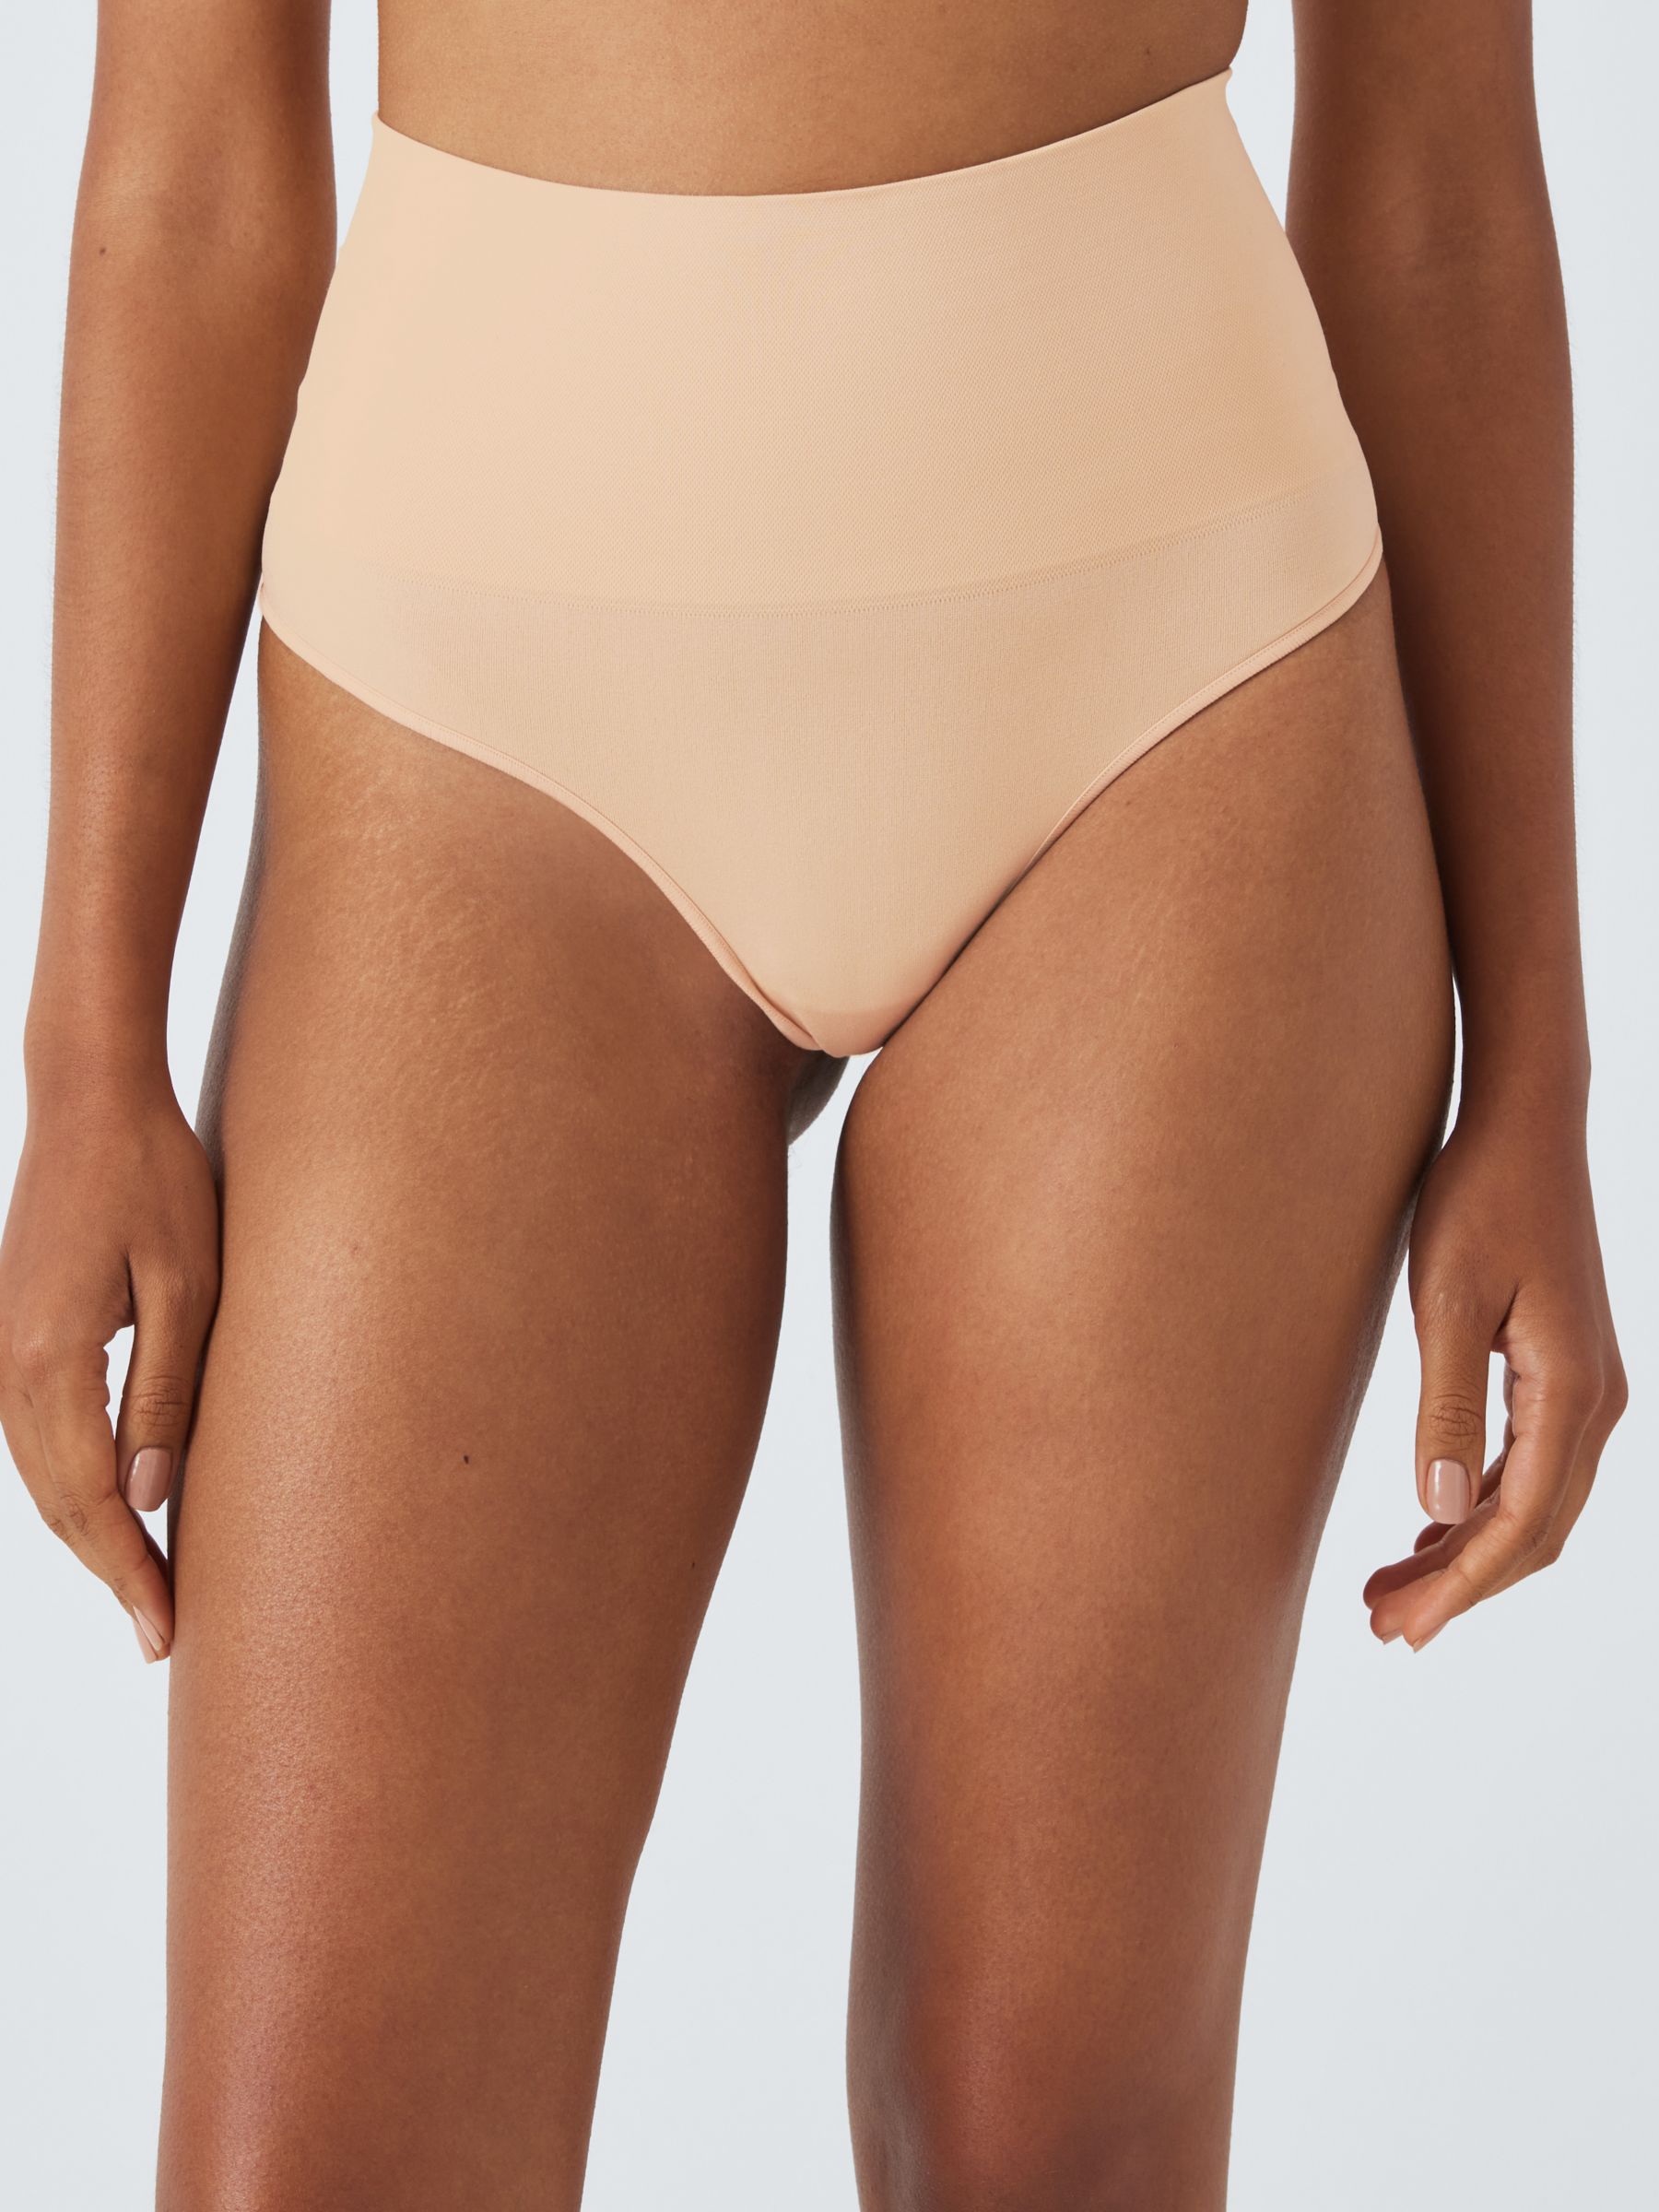 Nudea Barely There Thong, Navy at John Lewis & Partners